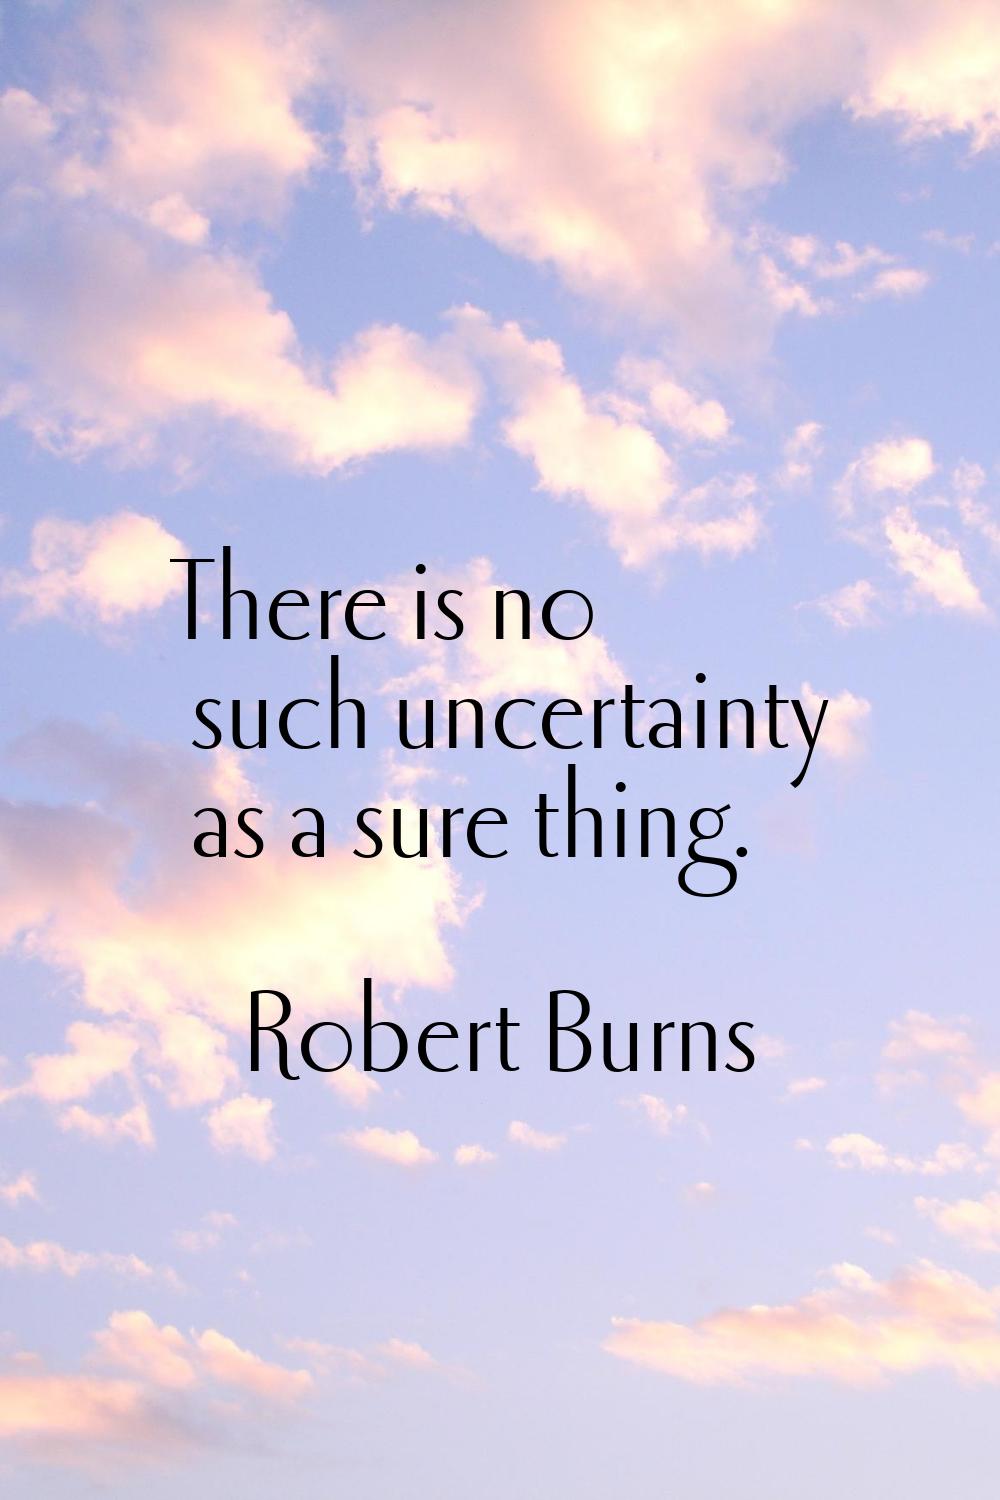 There is no such uncertainty as a sure thing.